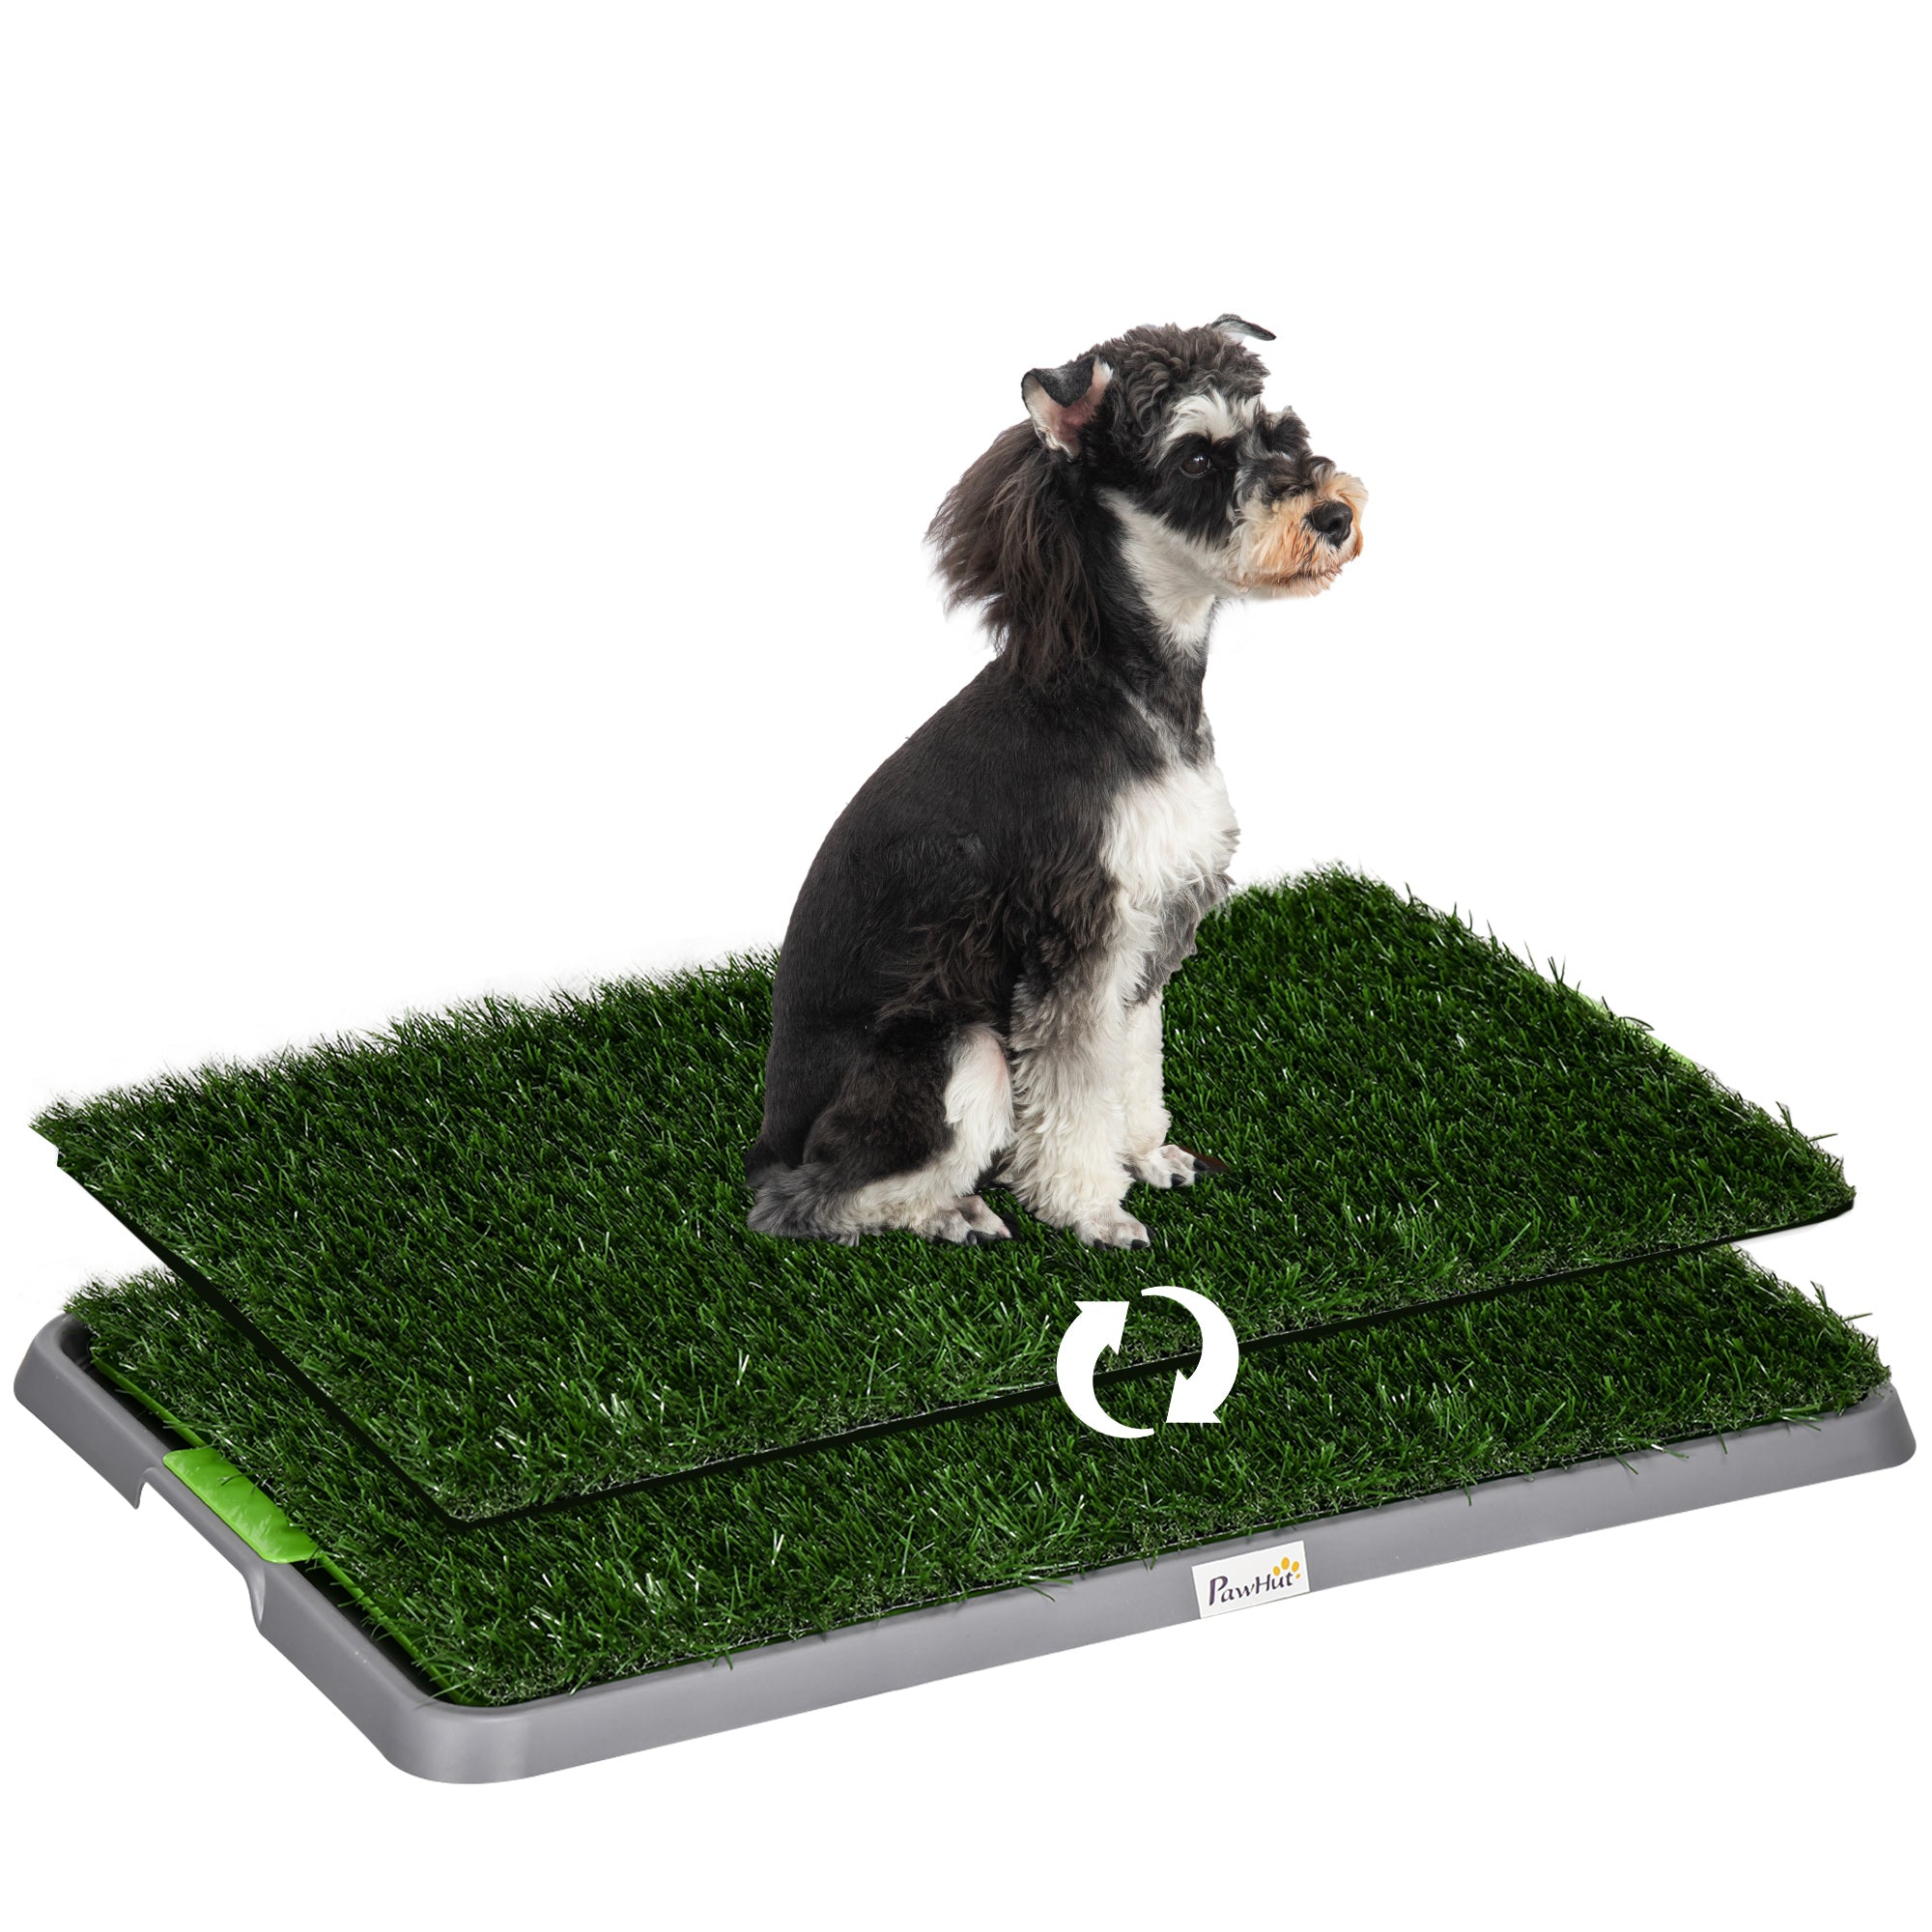 PawHut Artificial Grass Dog Toilet with Tray for Potty Training Indoor Outdoor, 2 Packs, 67 x 41cm